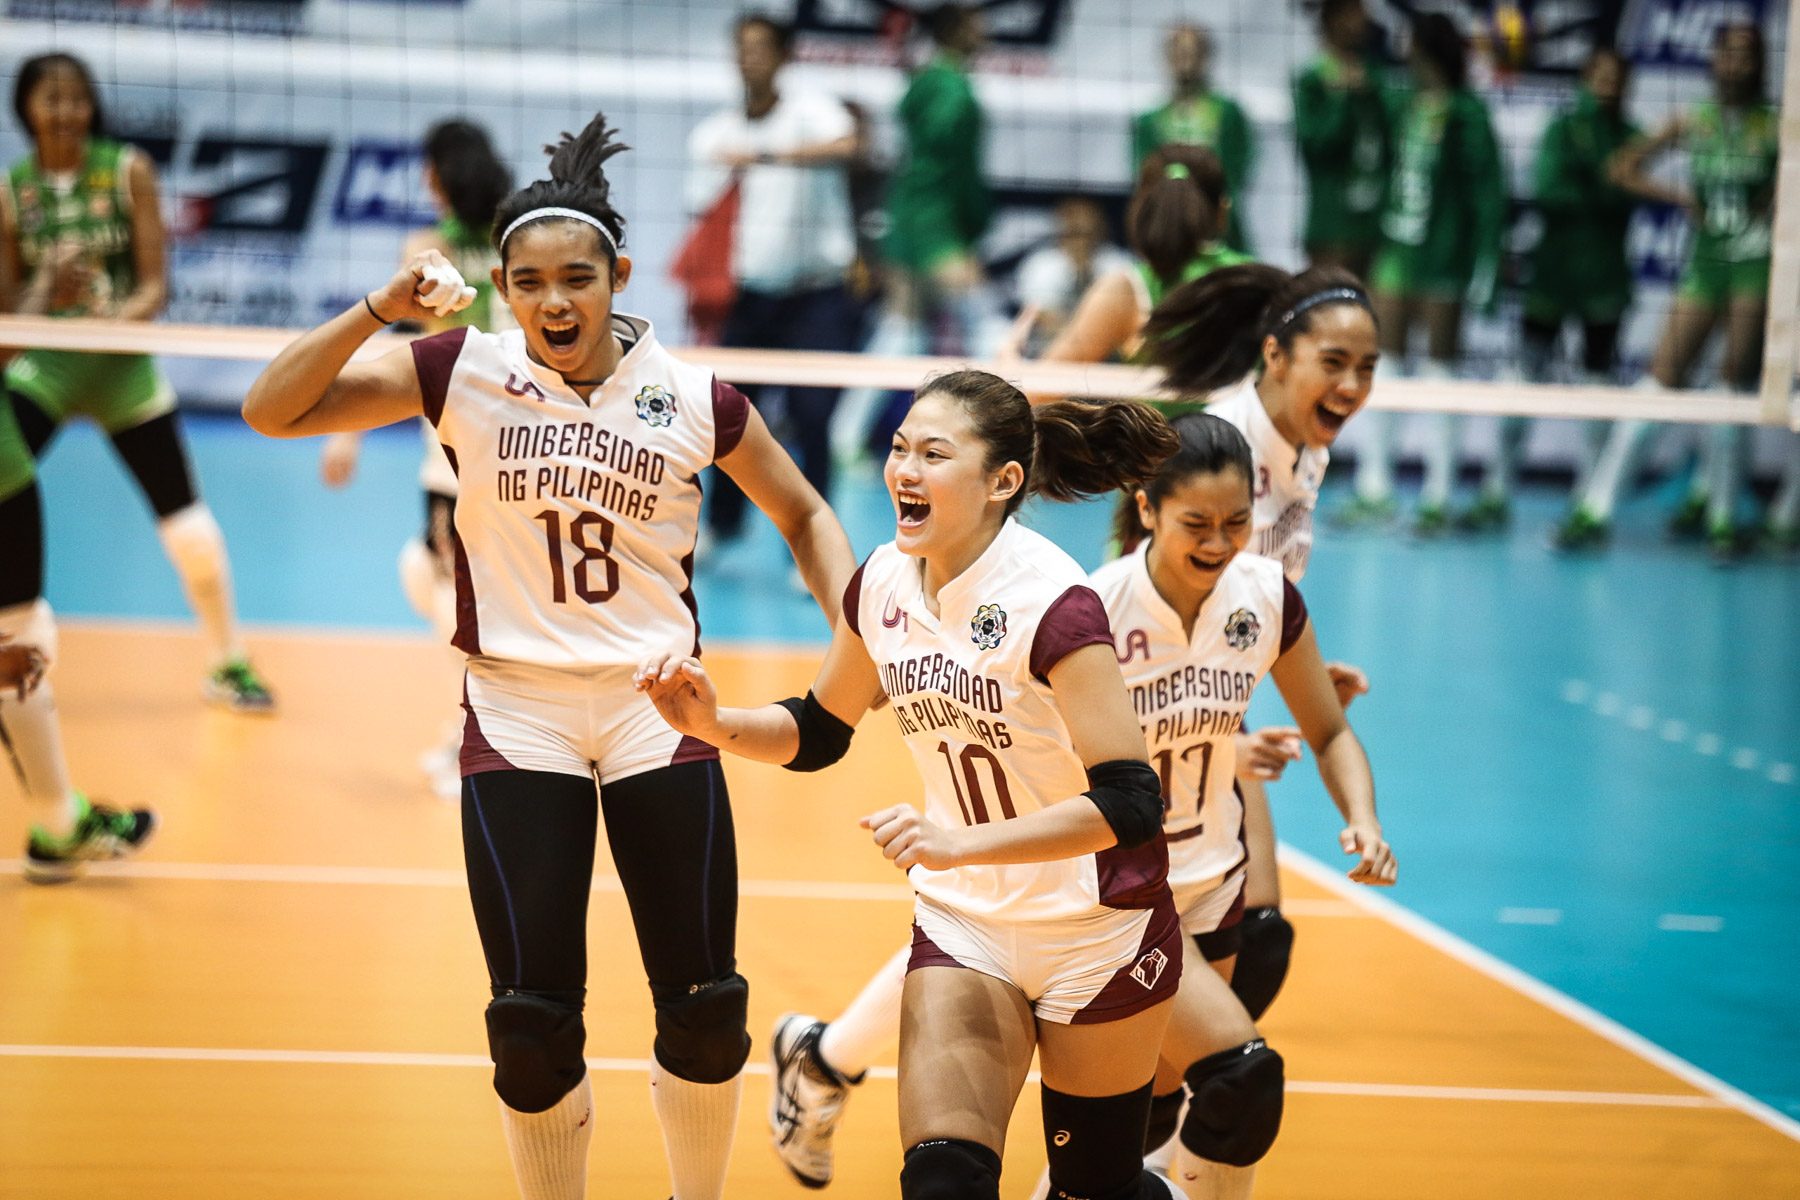 Pia Cayetano to UP Lady Maroons: ‘You shouldn’t be afraid of losing’